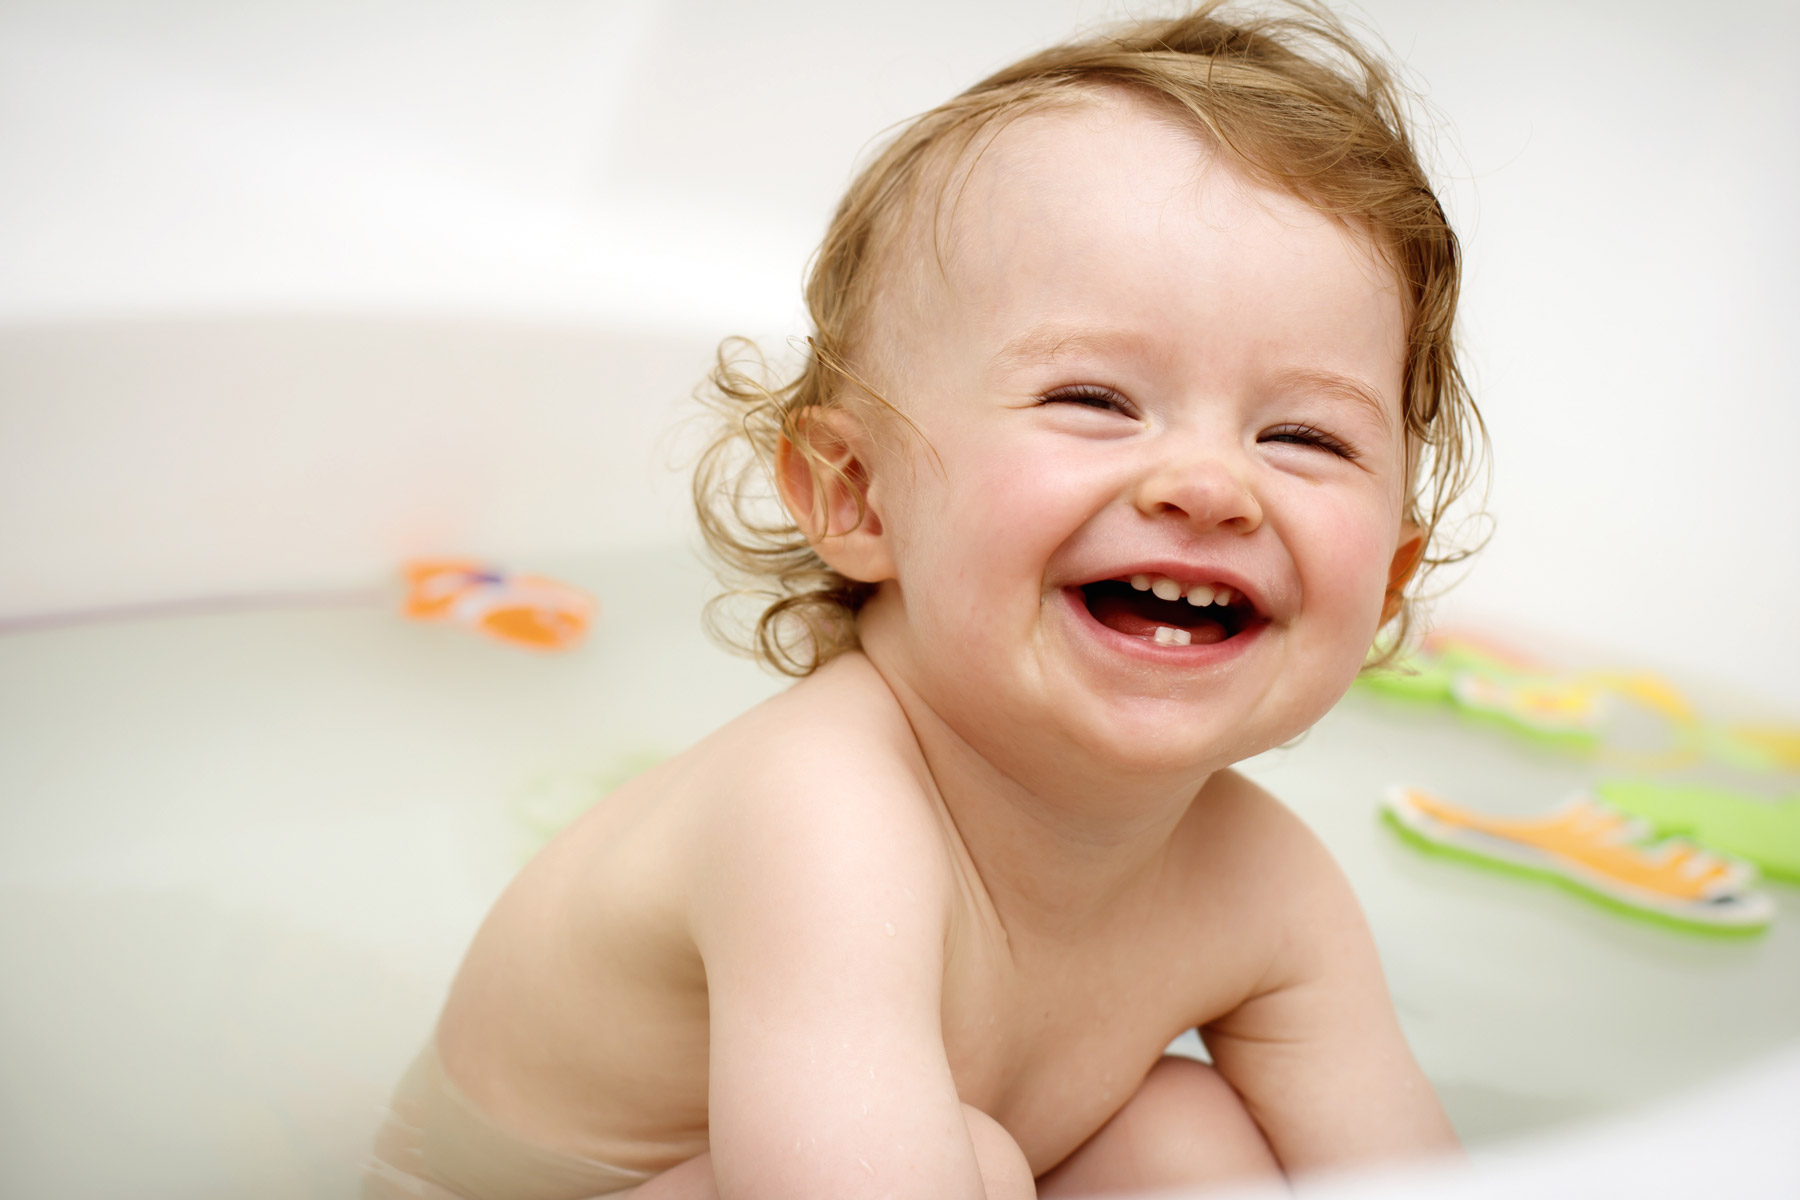 a baby laughing in bath tub